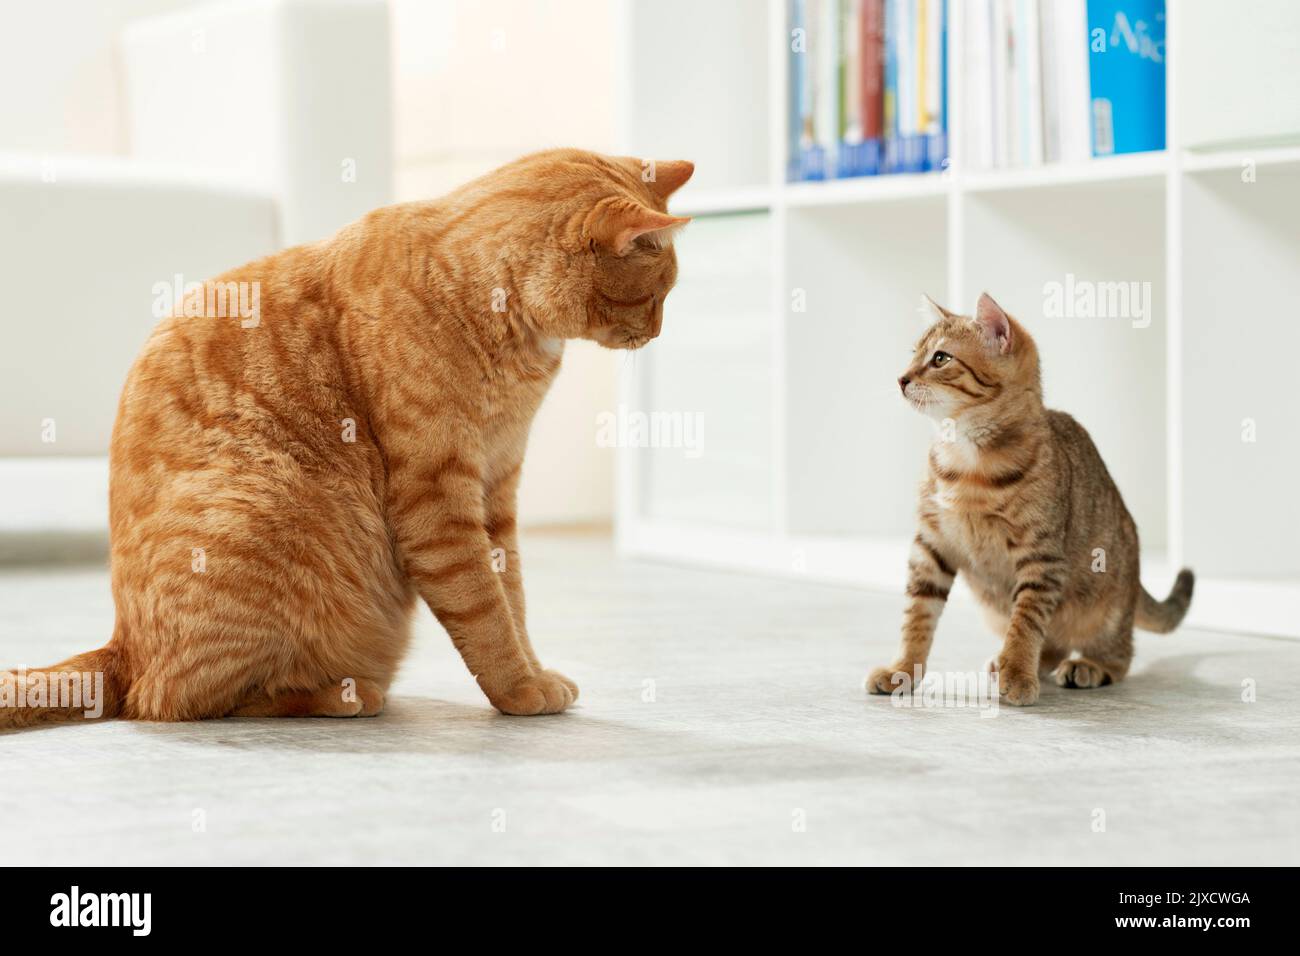 Domestic cat. A tabby kitten and an adult cat get to know each other. Germany Stock Photo